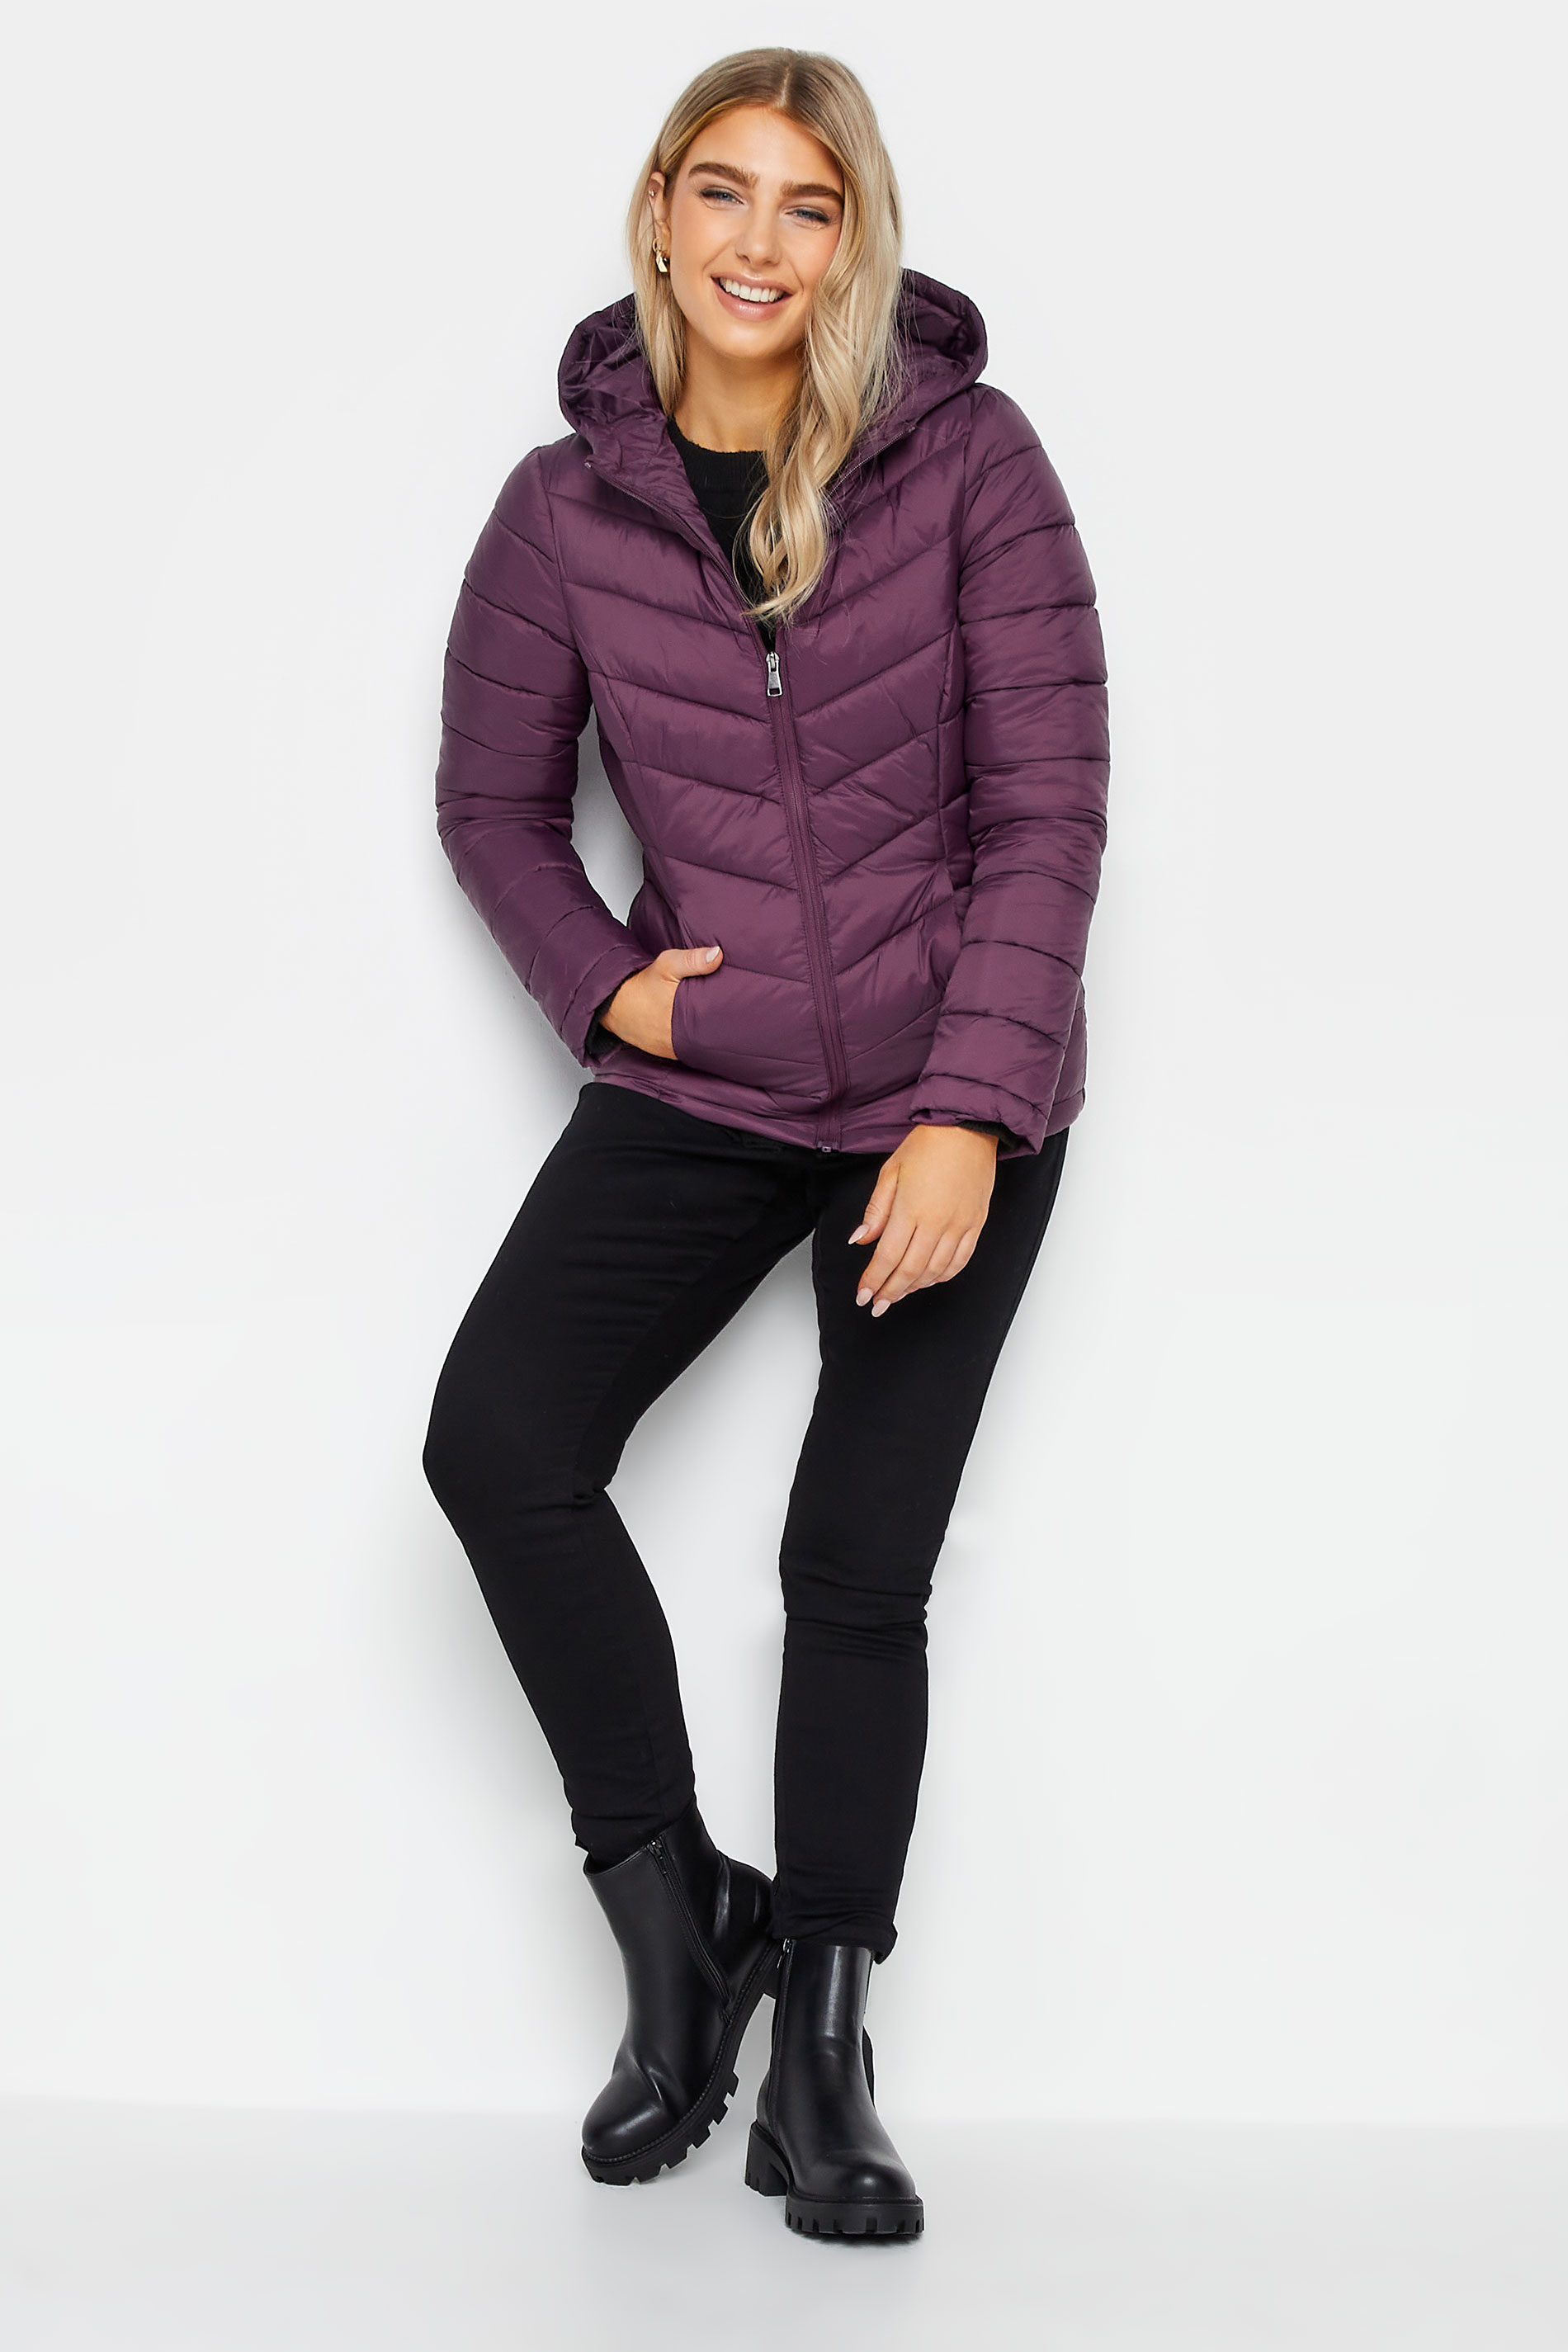 M&Co Purple Quilted Puffer Jacket | M&Co 2